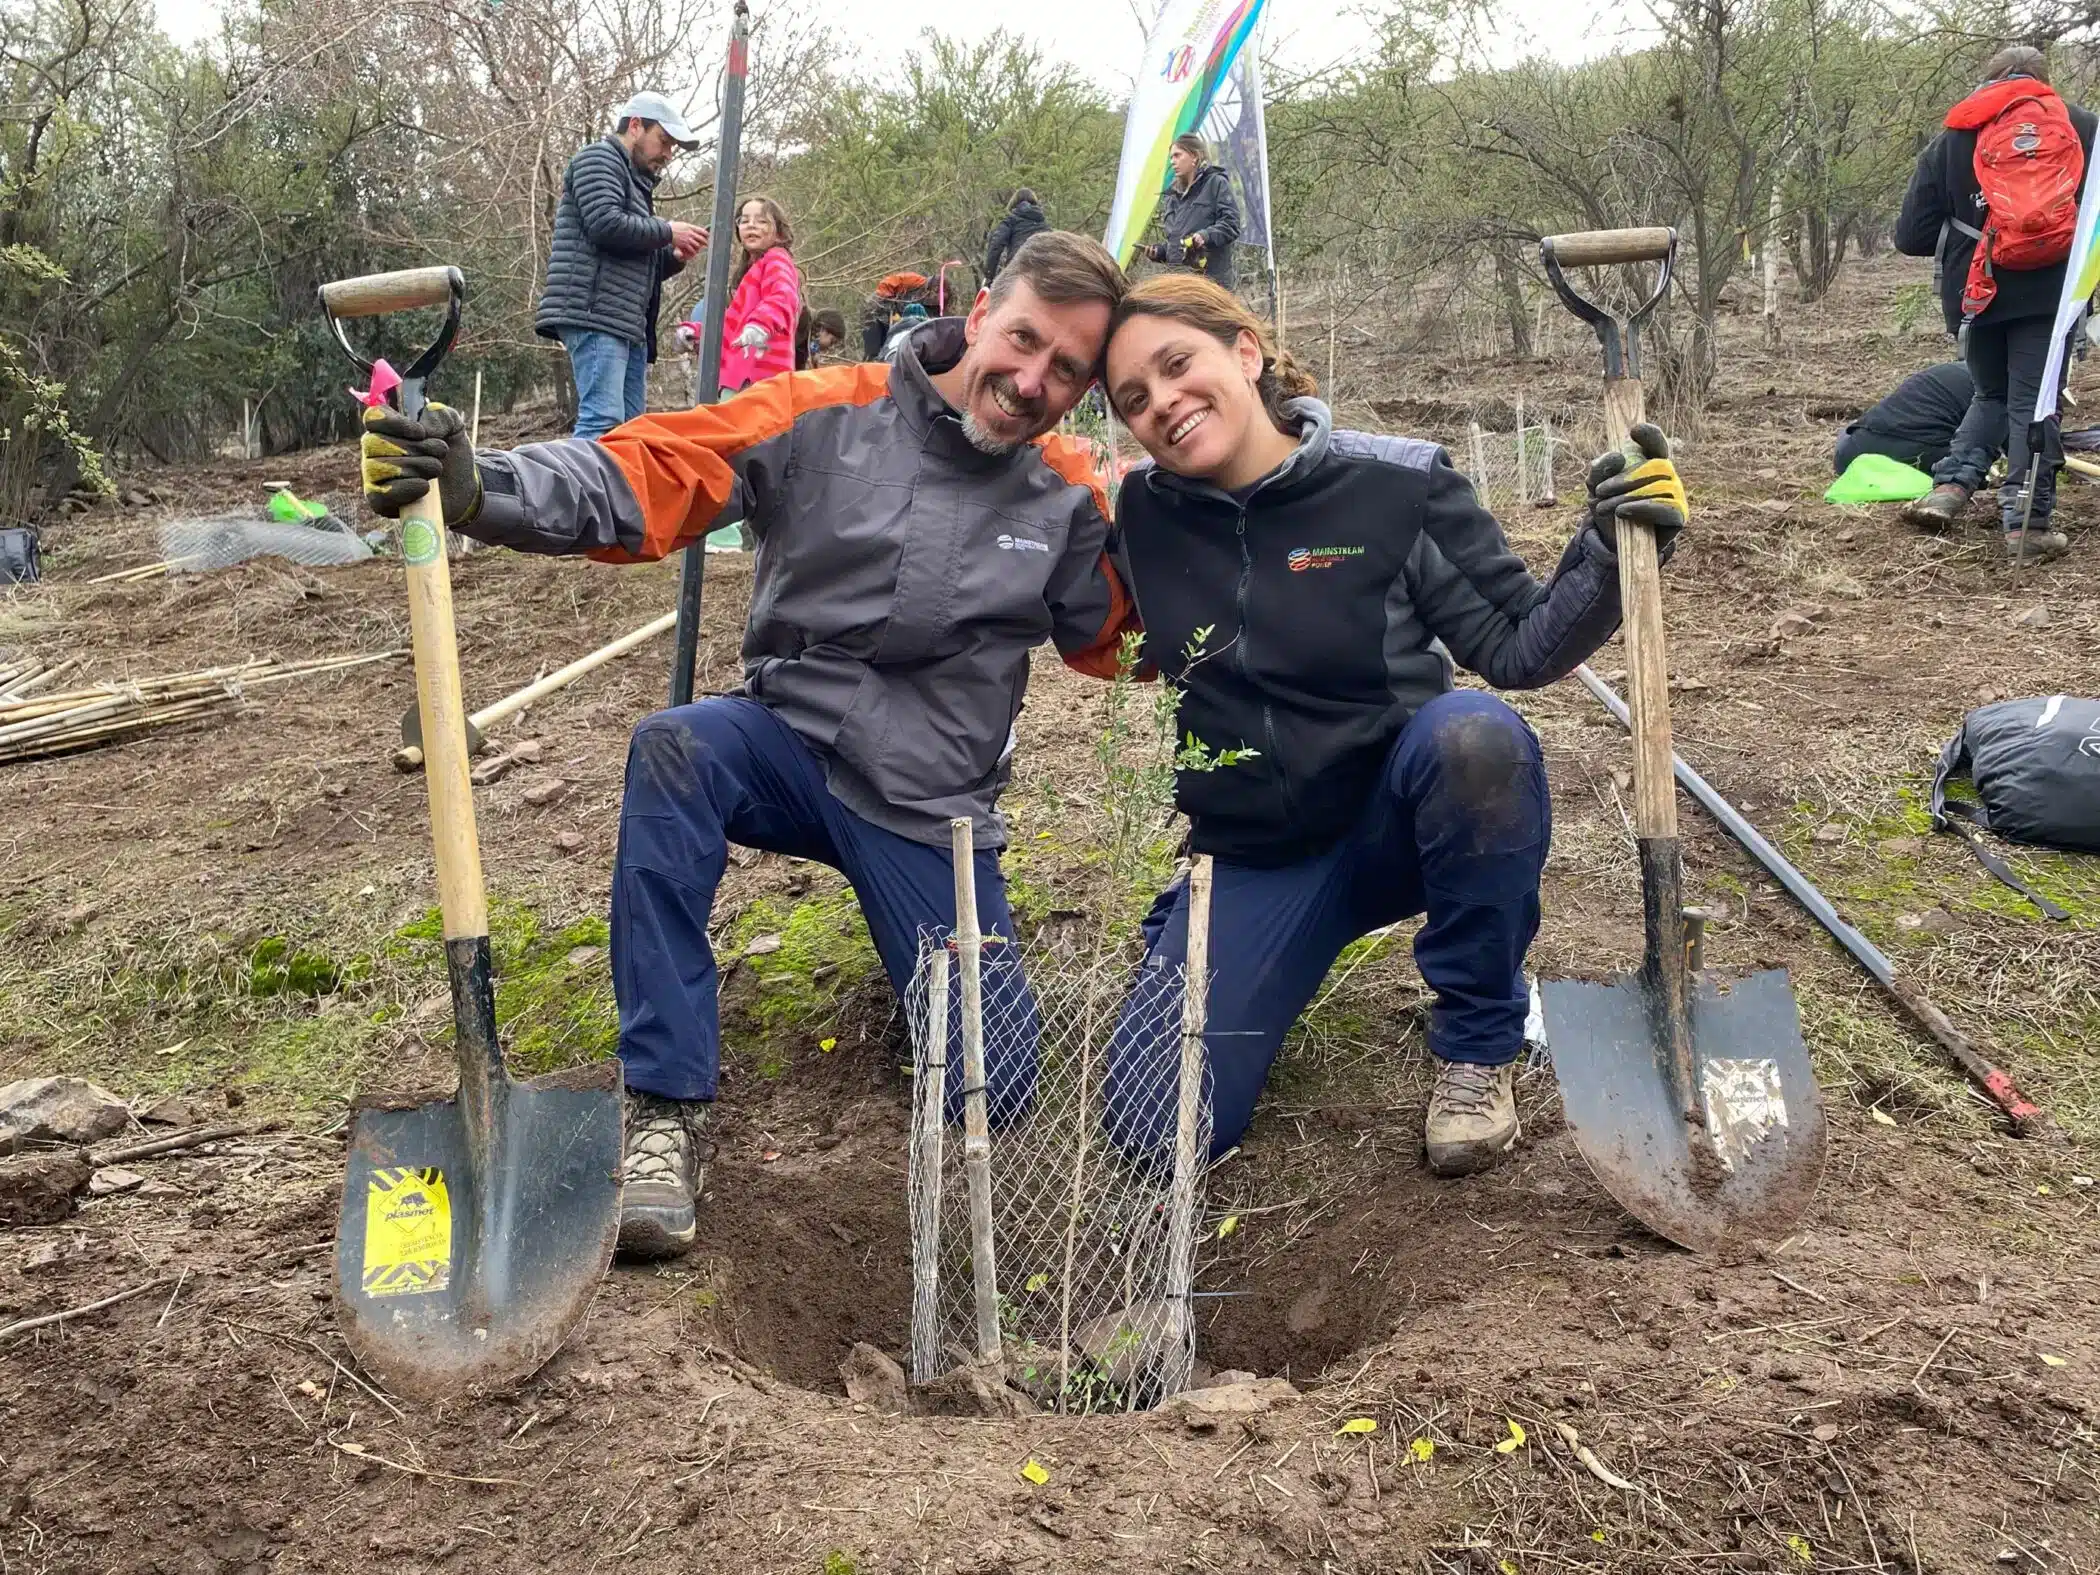 Mainstream people planting trees reforestation Santiago Chile